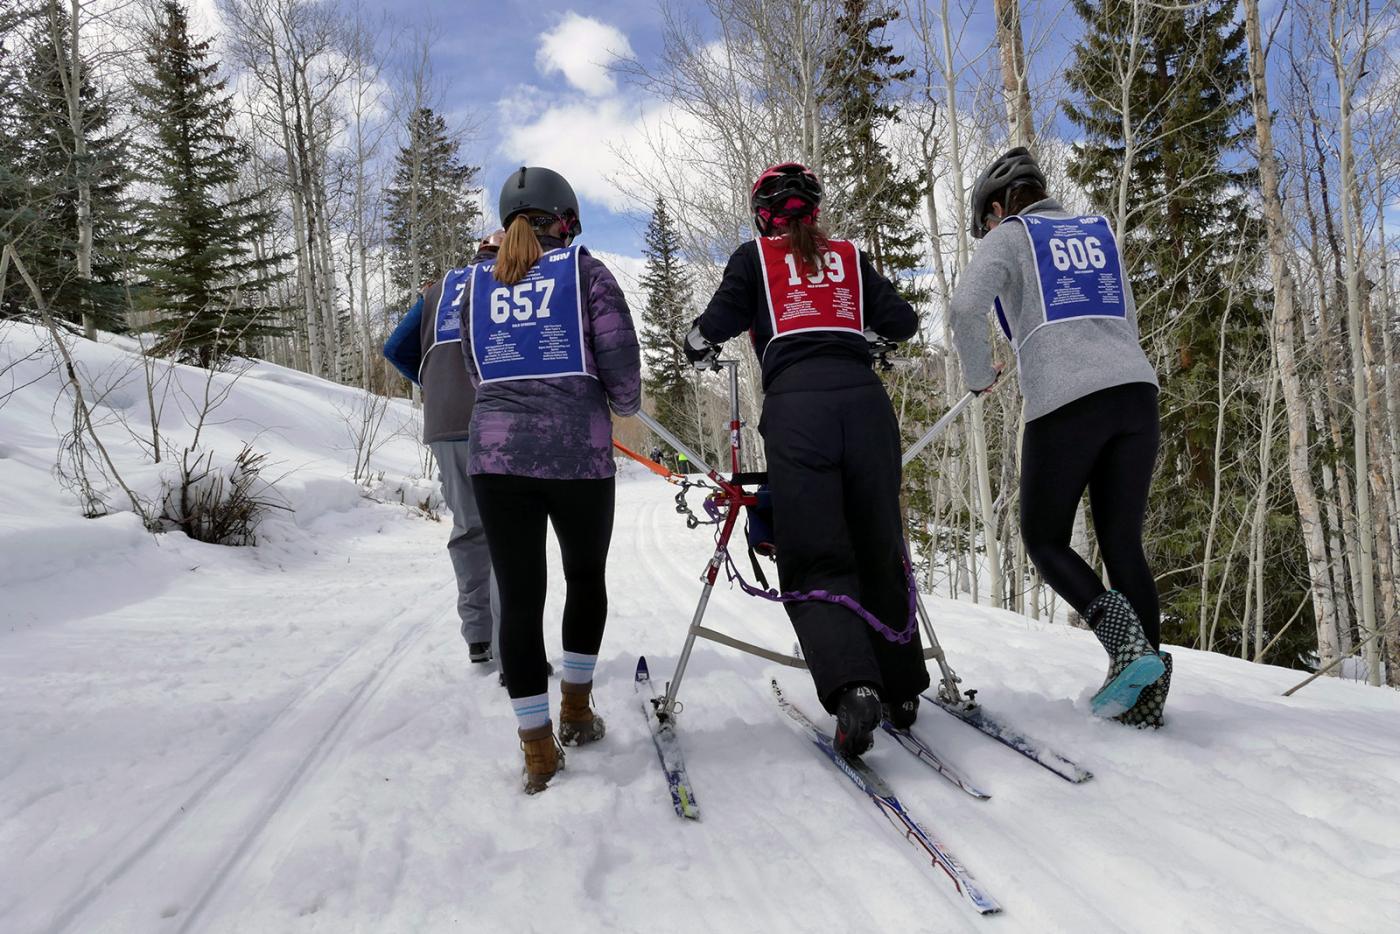 Adaptations to cross country skiing for a standing skier